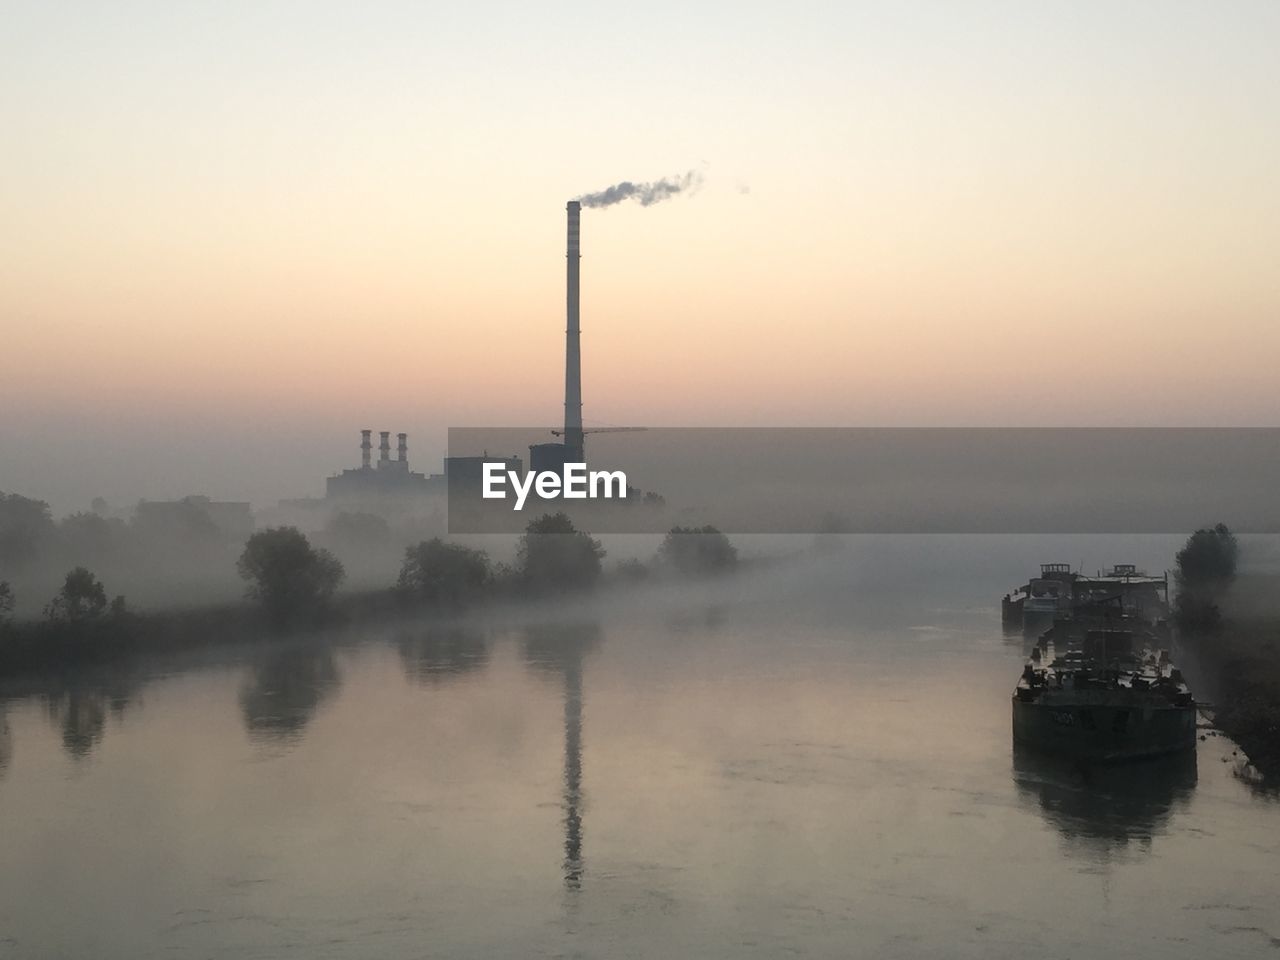 Smoke emitting from factory by river during foggy weather